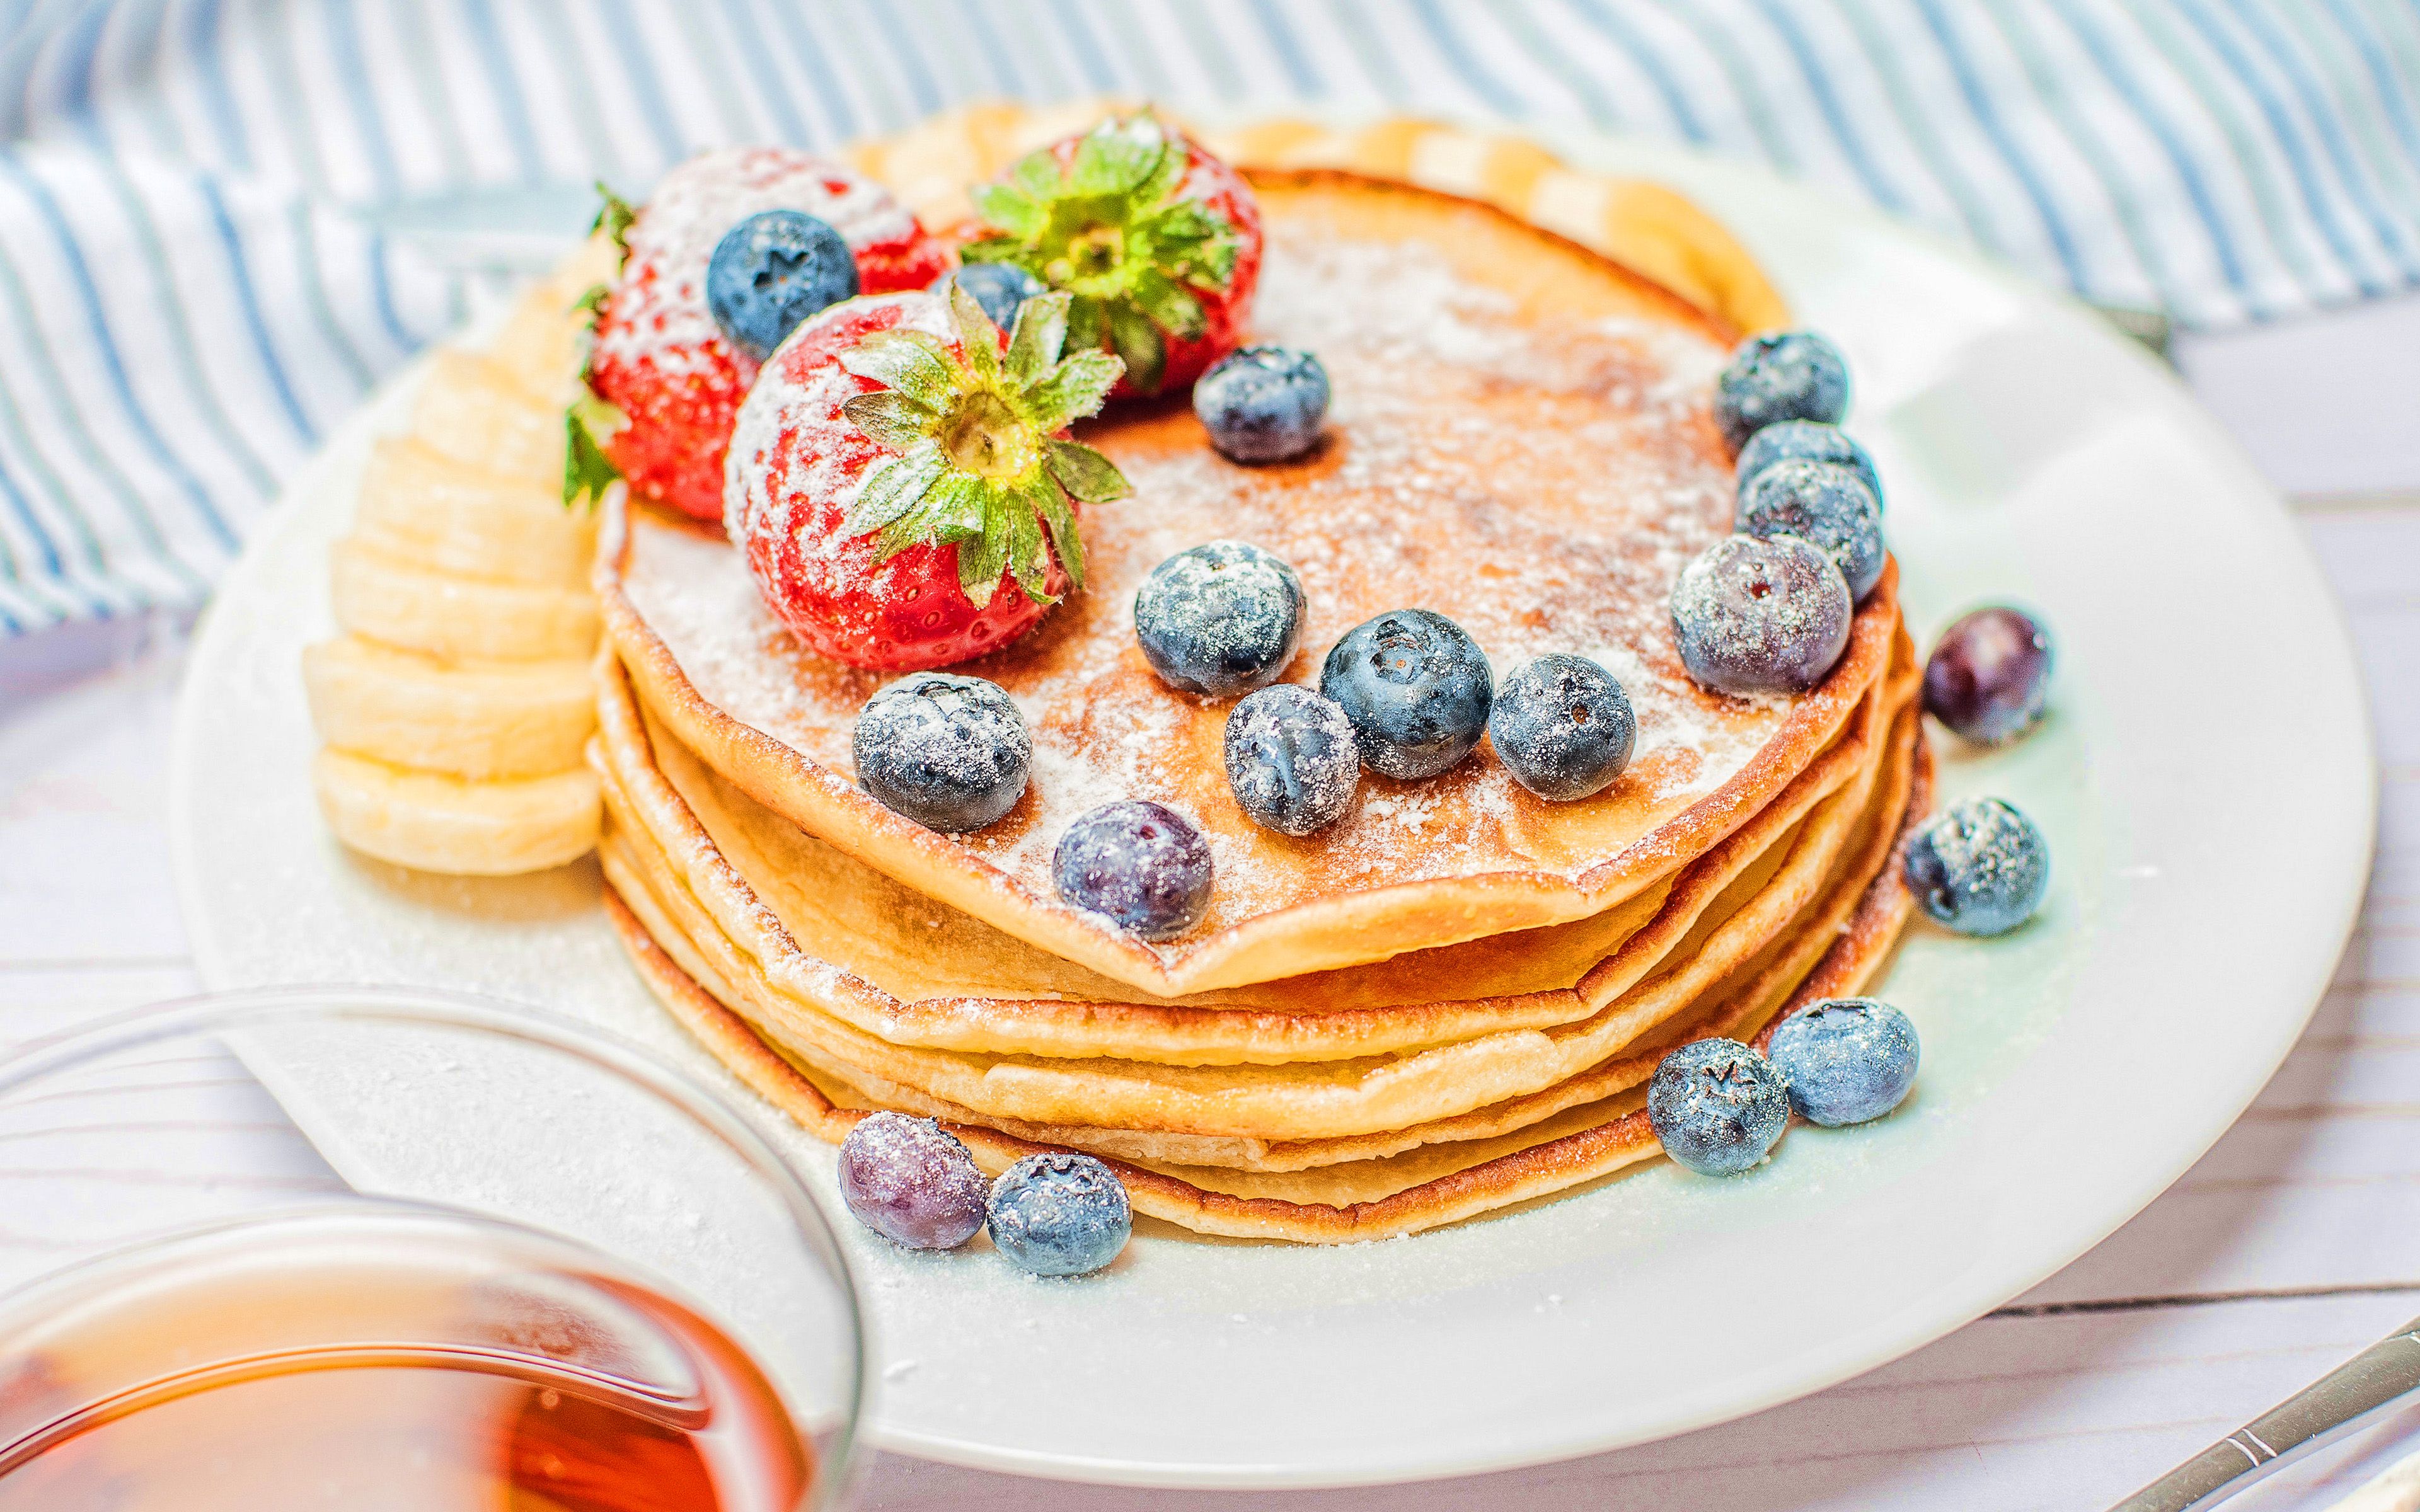 Download wallpaper pancakes, 4k, berries, fruits, breakfast, healthy food, pancakes on plate for desktop with resolution 3840x2400. High Quality HD picture wallpaper